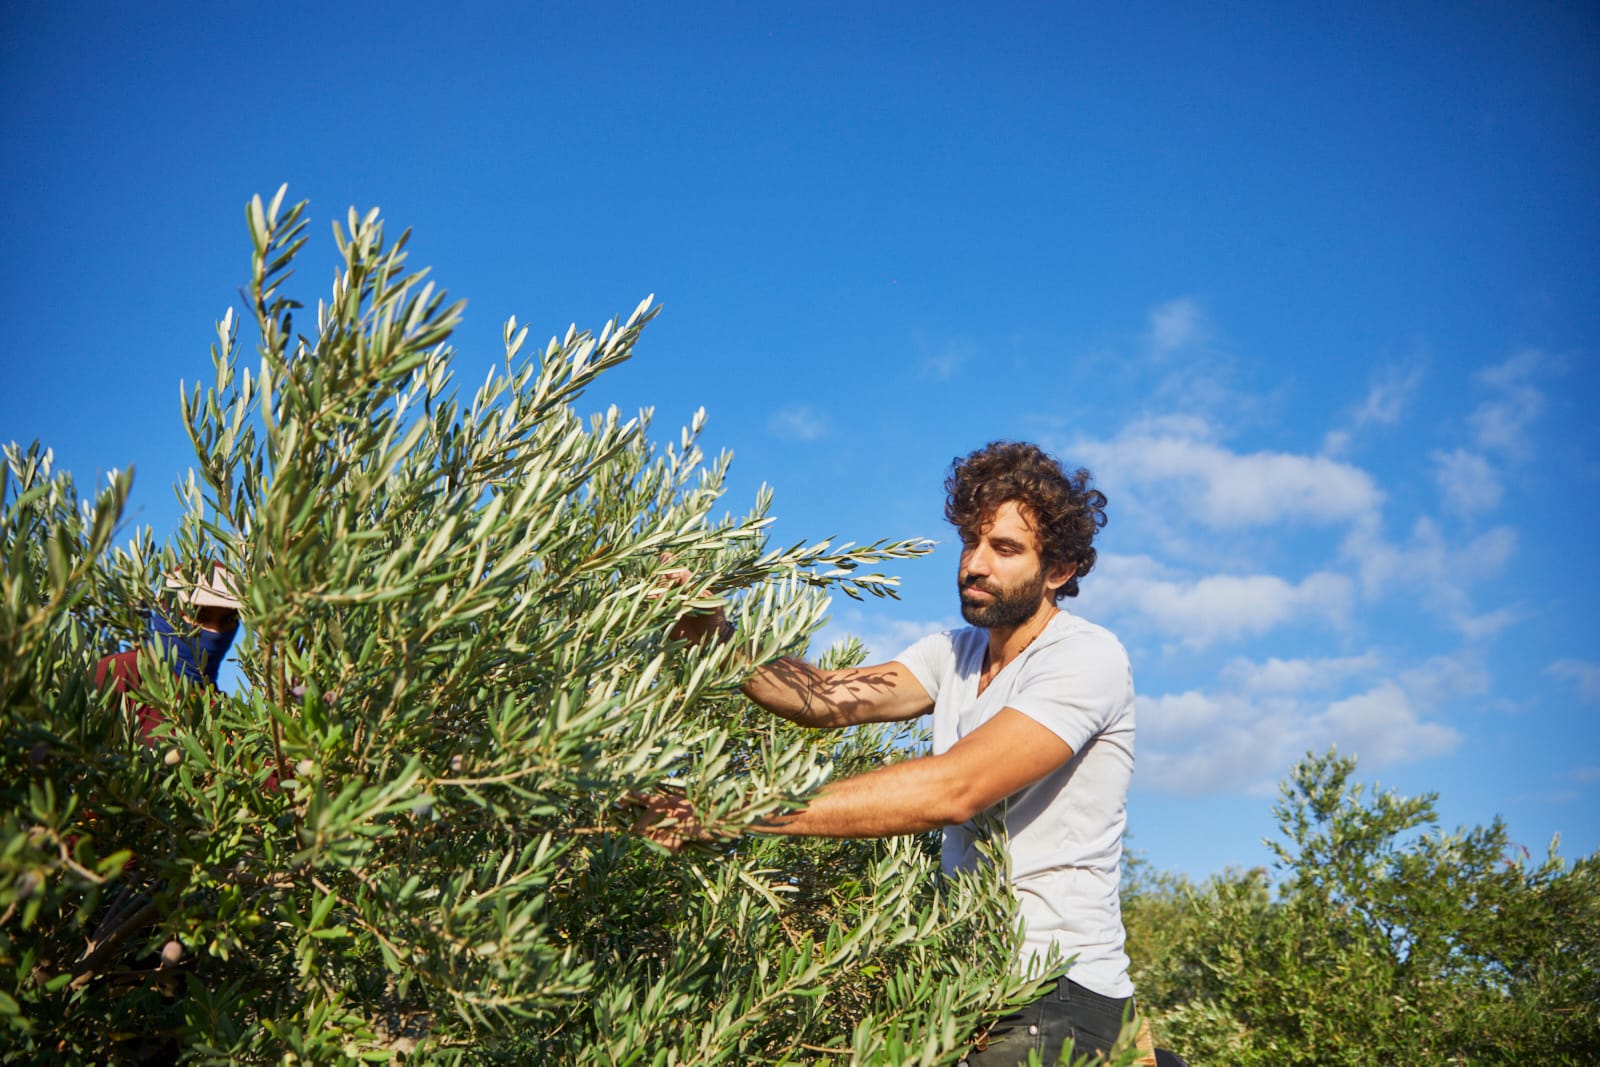 africa-middle-east-profiles-the-best-olive-oils-modern-techniques-and-ancient-groves-a-winning-combination-for-solar-olives-olive-oil-times